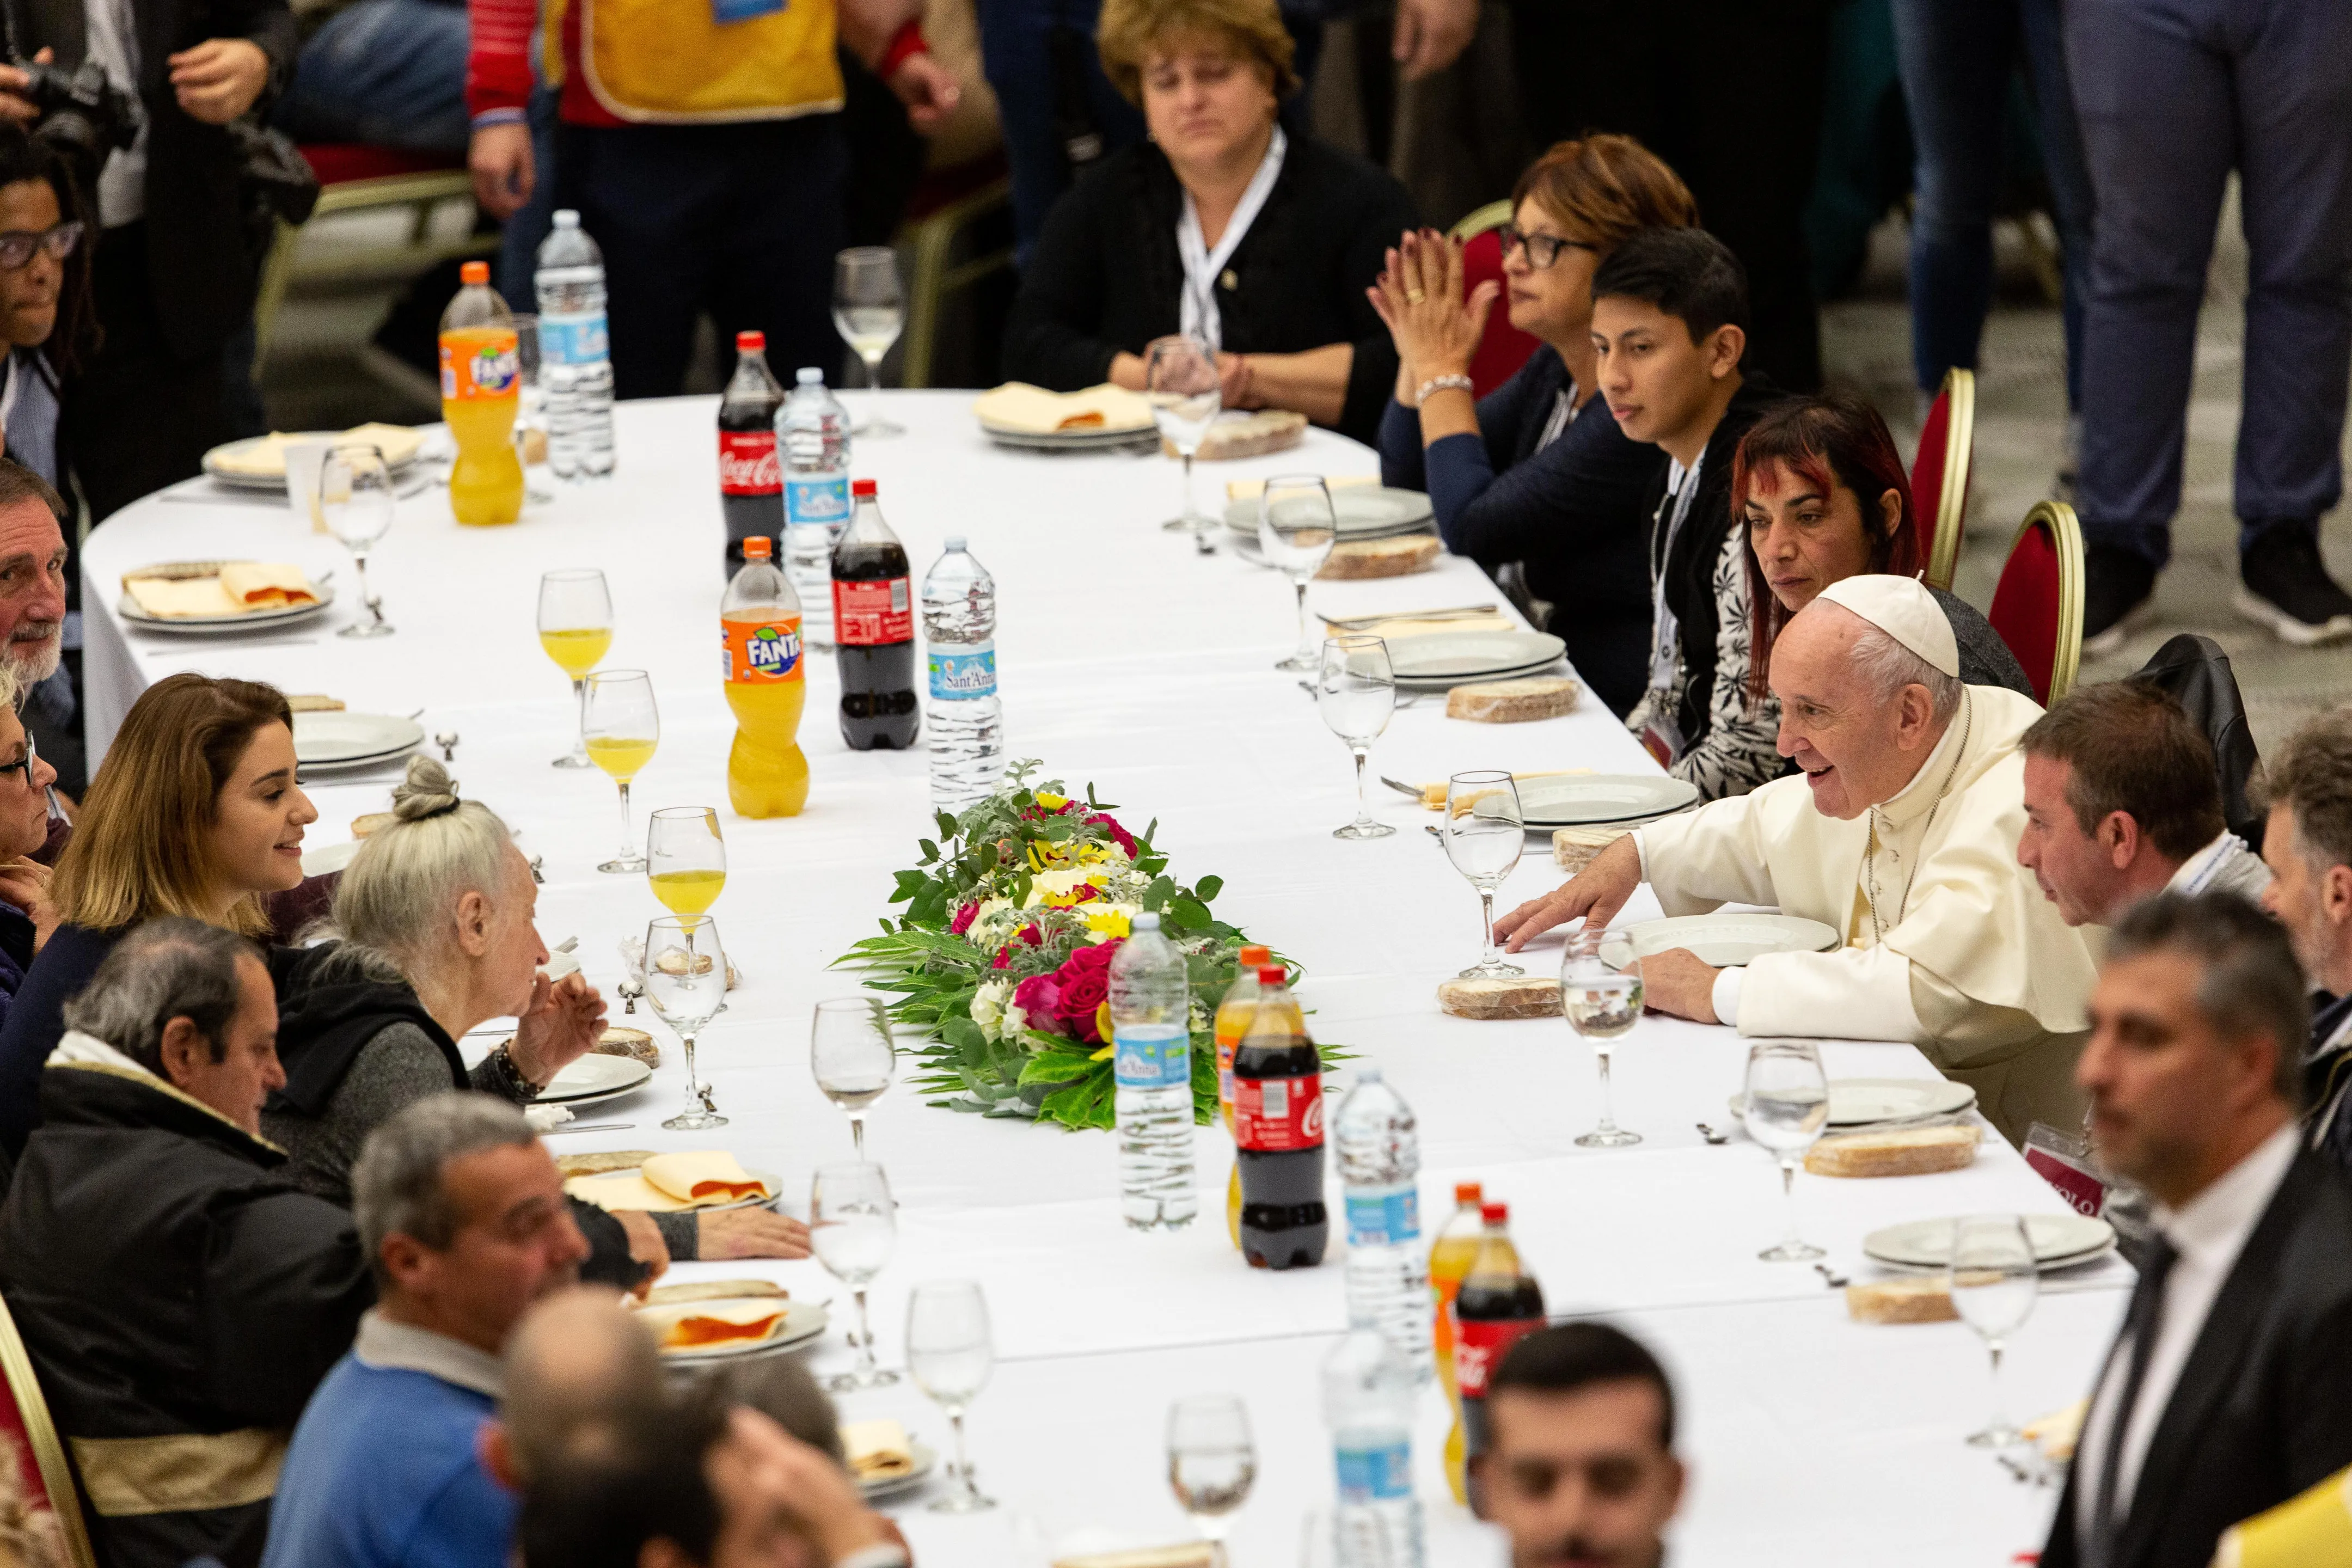 Pope Francis shared a free lunch with nearly 1,500 poor people invited to dine at the Vatican for the 3rd annual World Day of the Poor on Nov. 17, 2019?w=200&h=150